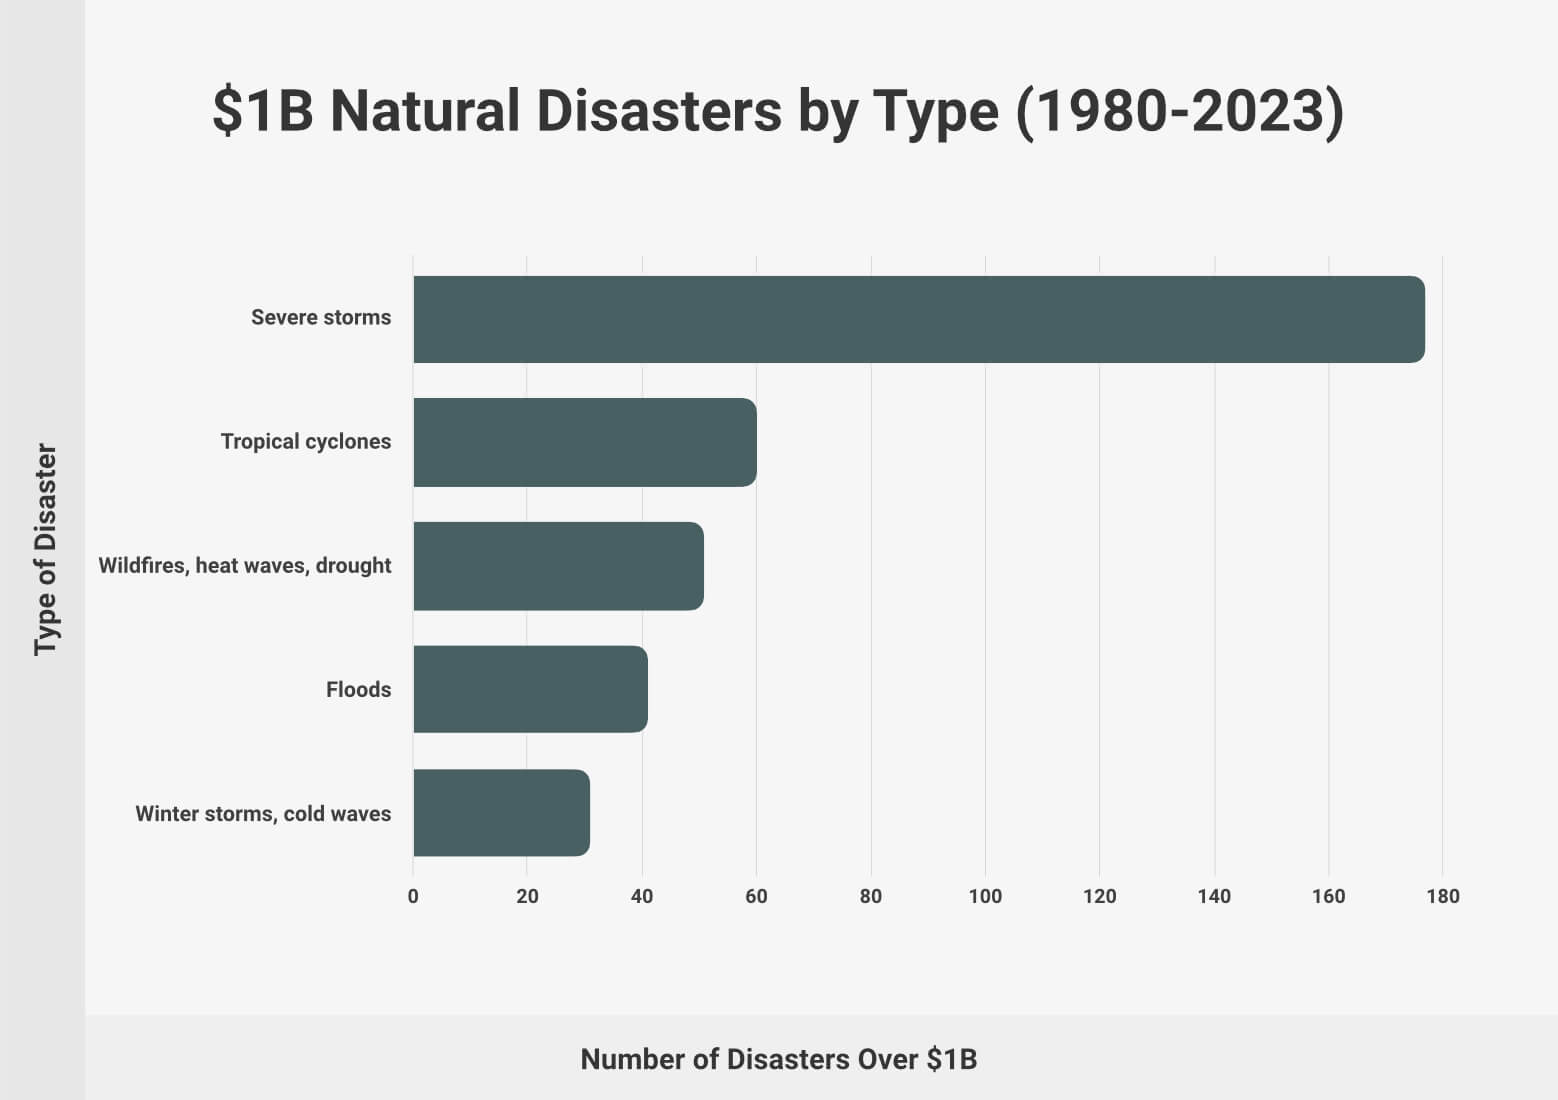 Major Natural Disasters by Type (1980-2023)